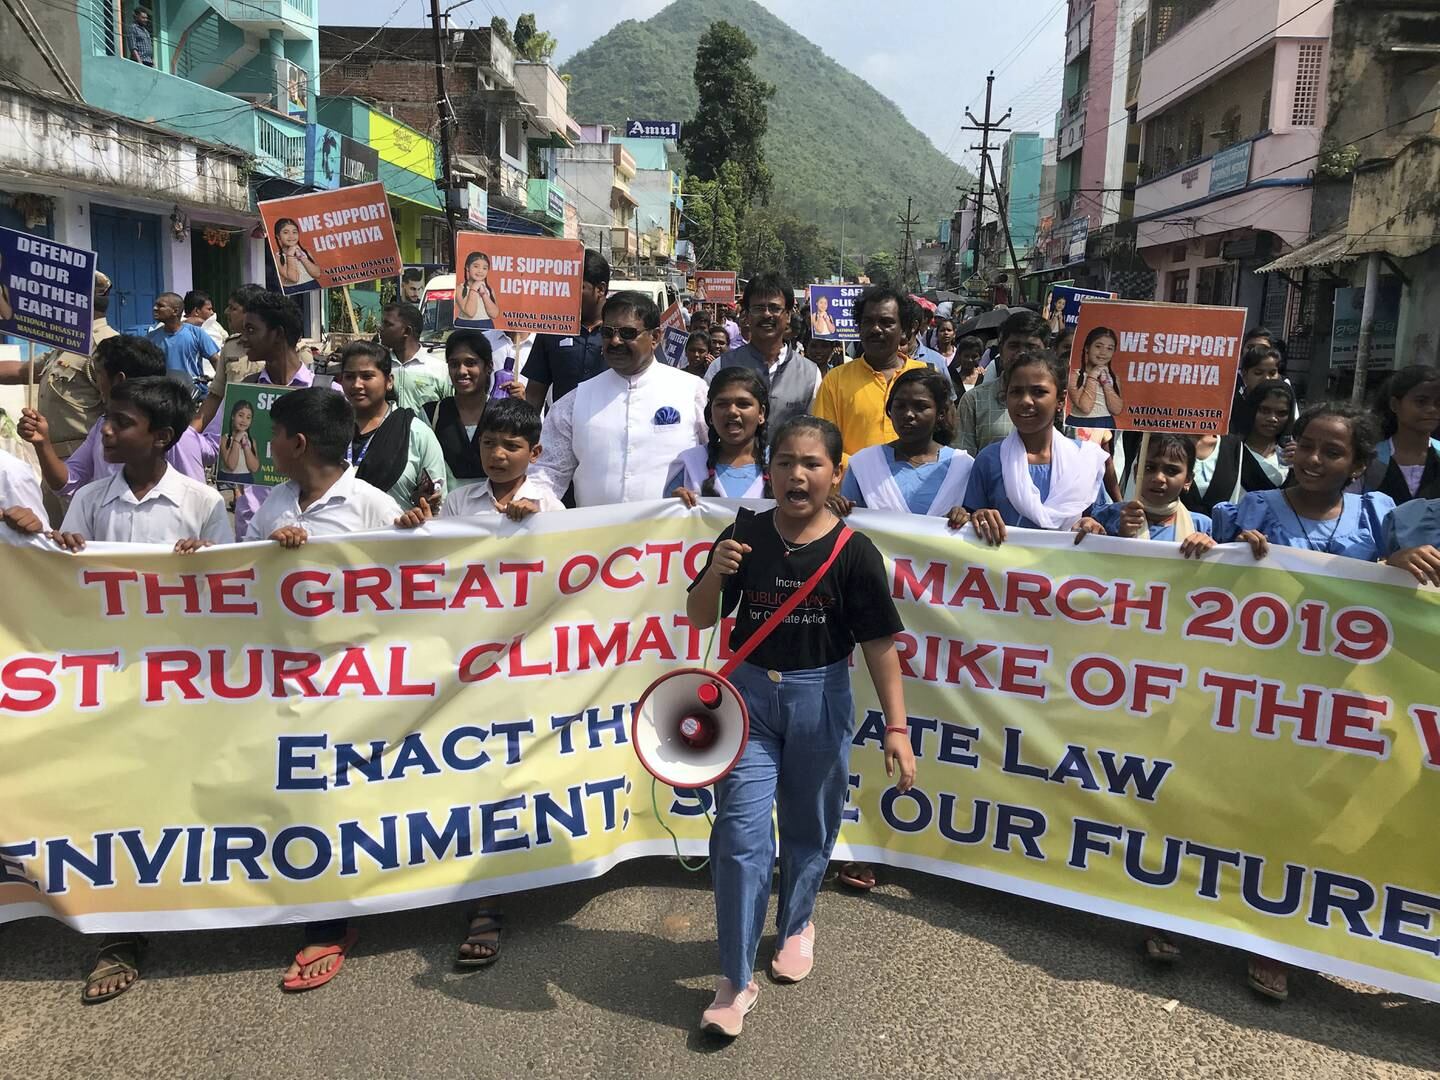 Licypriya Kangujam leads the historic Great October March 2019 during India's biggest rural climate strike.